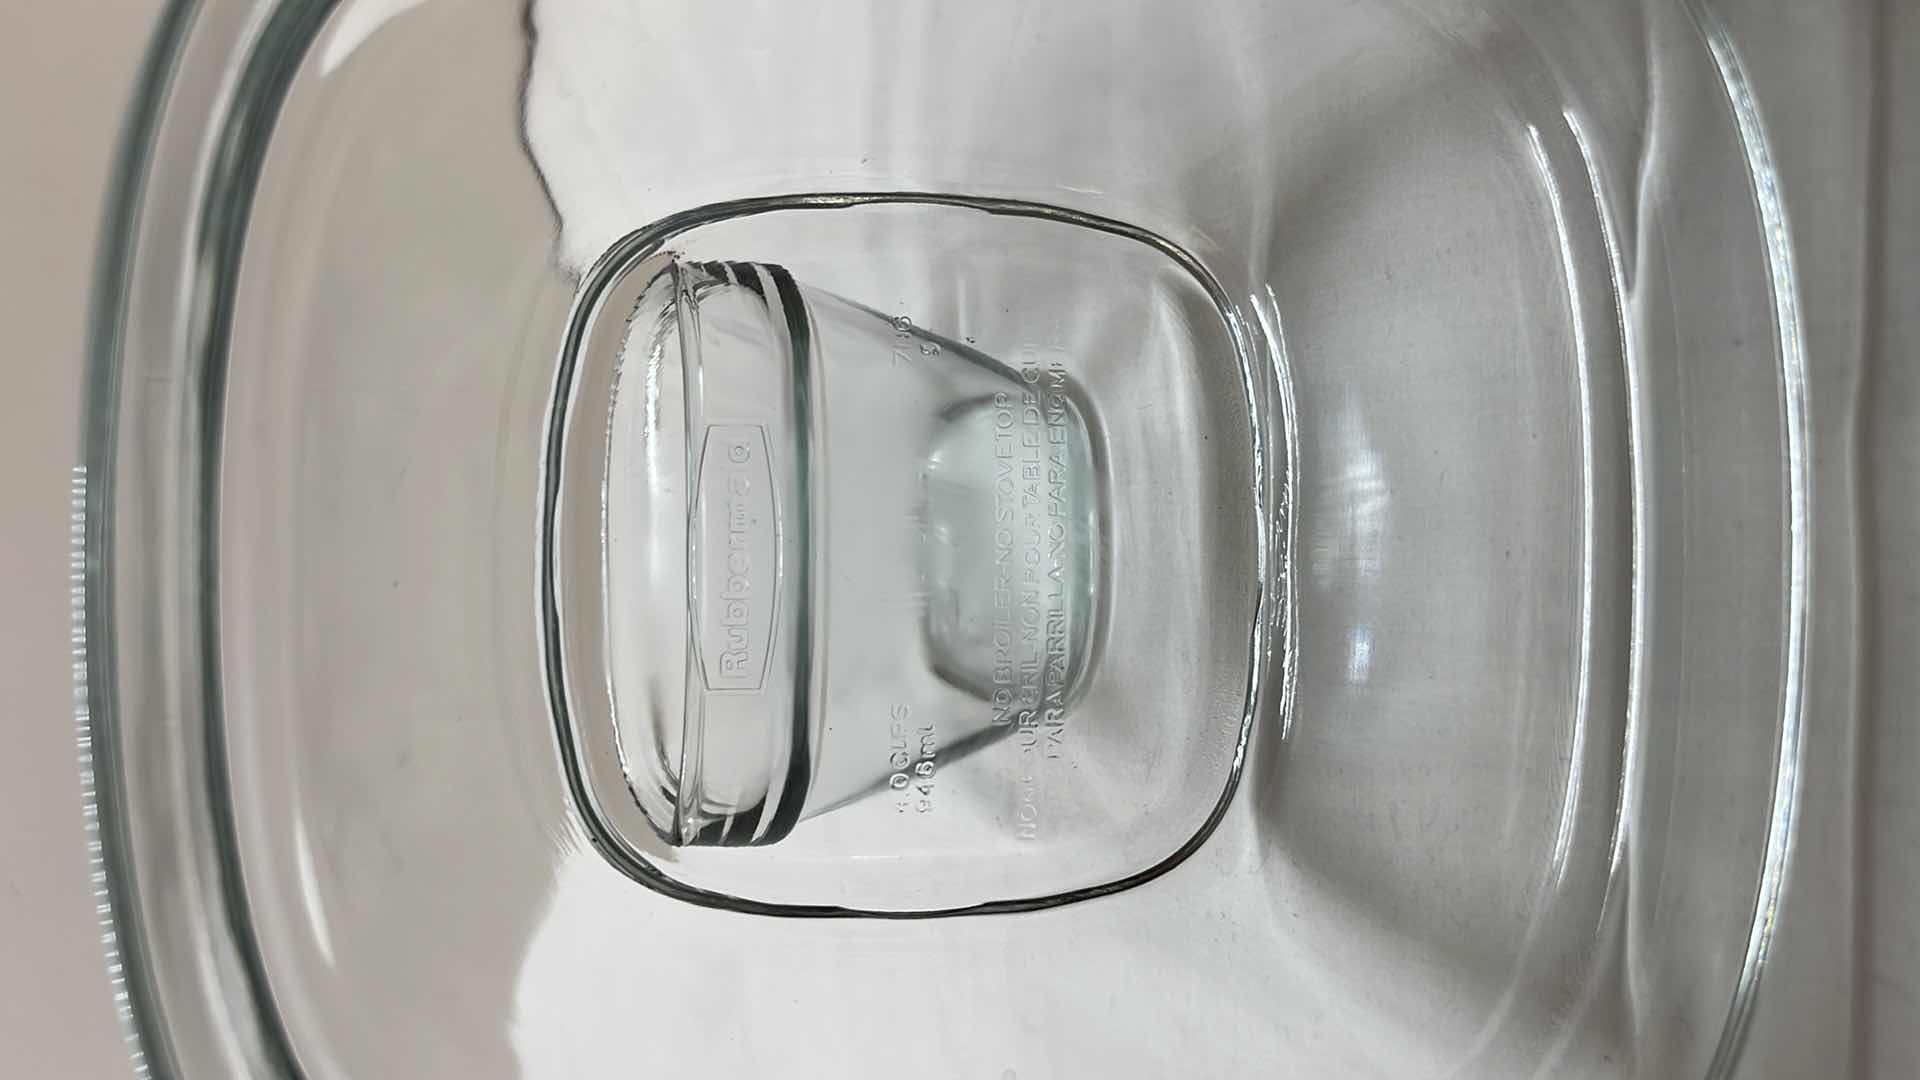 Photo 5 of PYREX GLASS MEASURING CUPS (2) & RUBBERMAID GLASS SQUARE BOWLS (2)